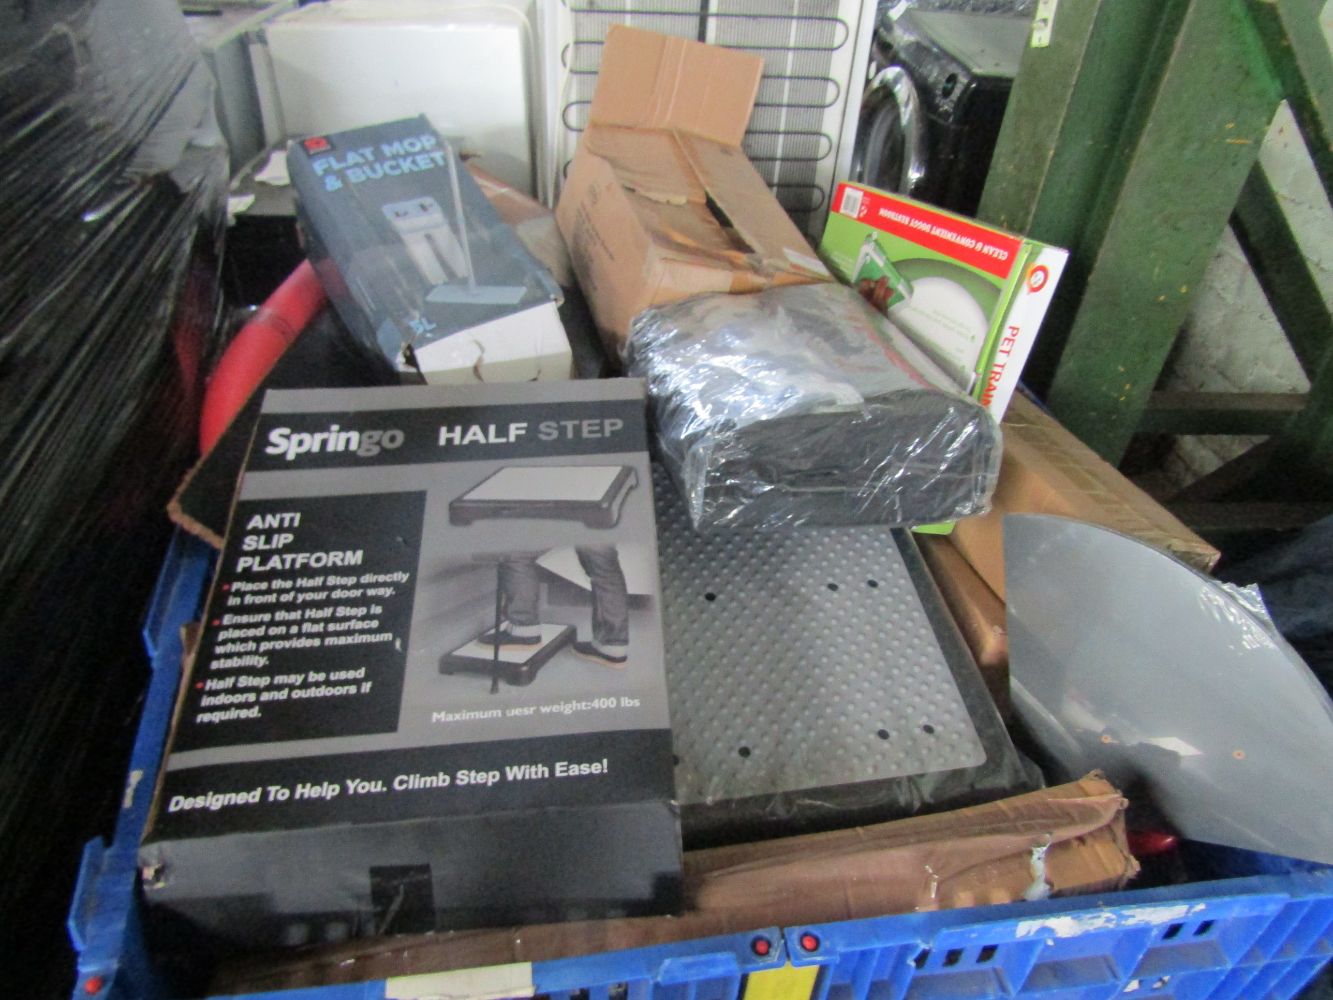 Traders Pallet Auction with Towel Radiators, Toys, Household Items and Electricals with new lower starting bids